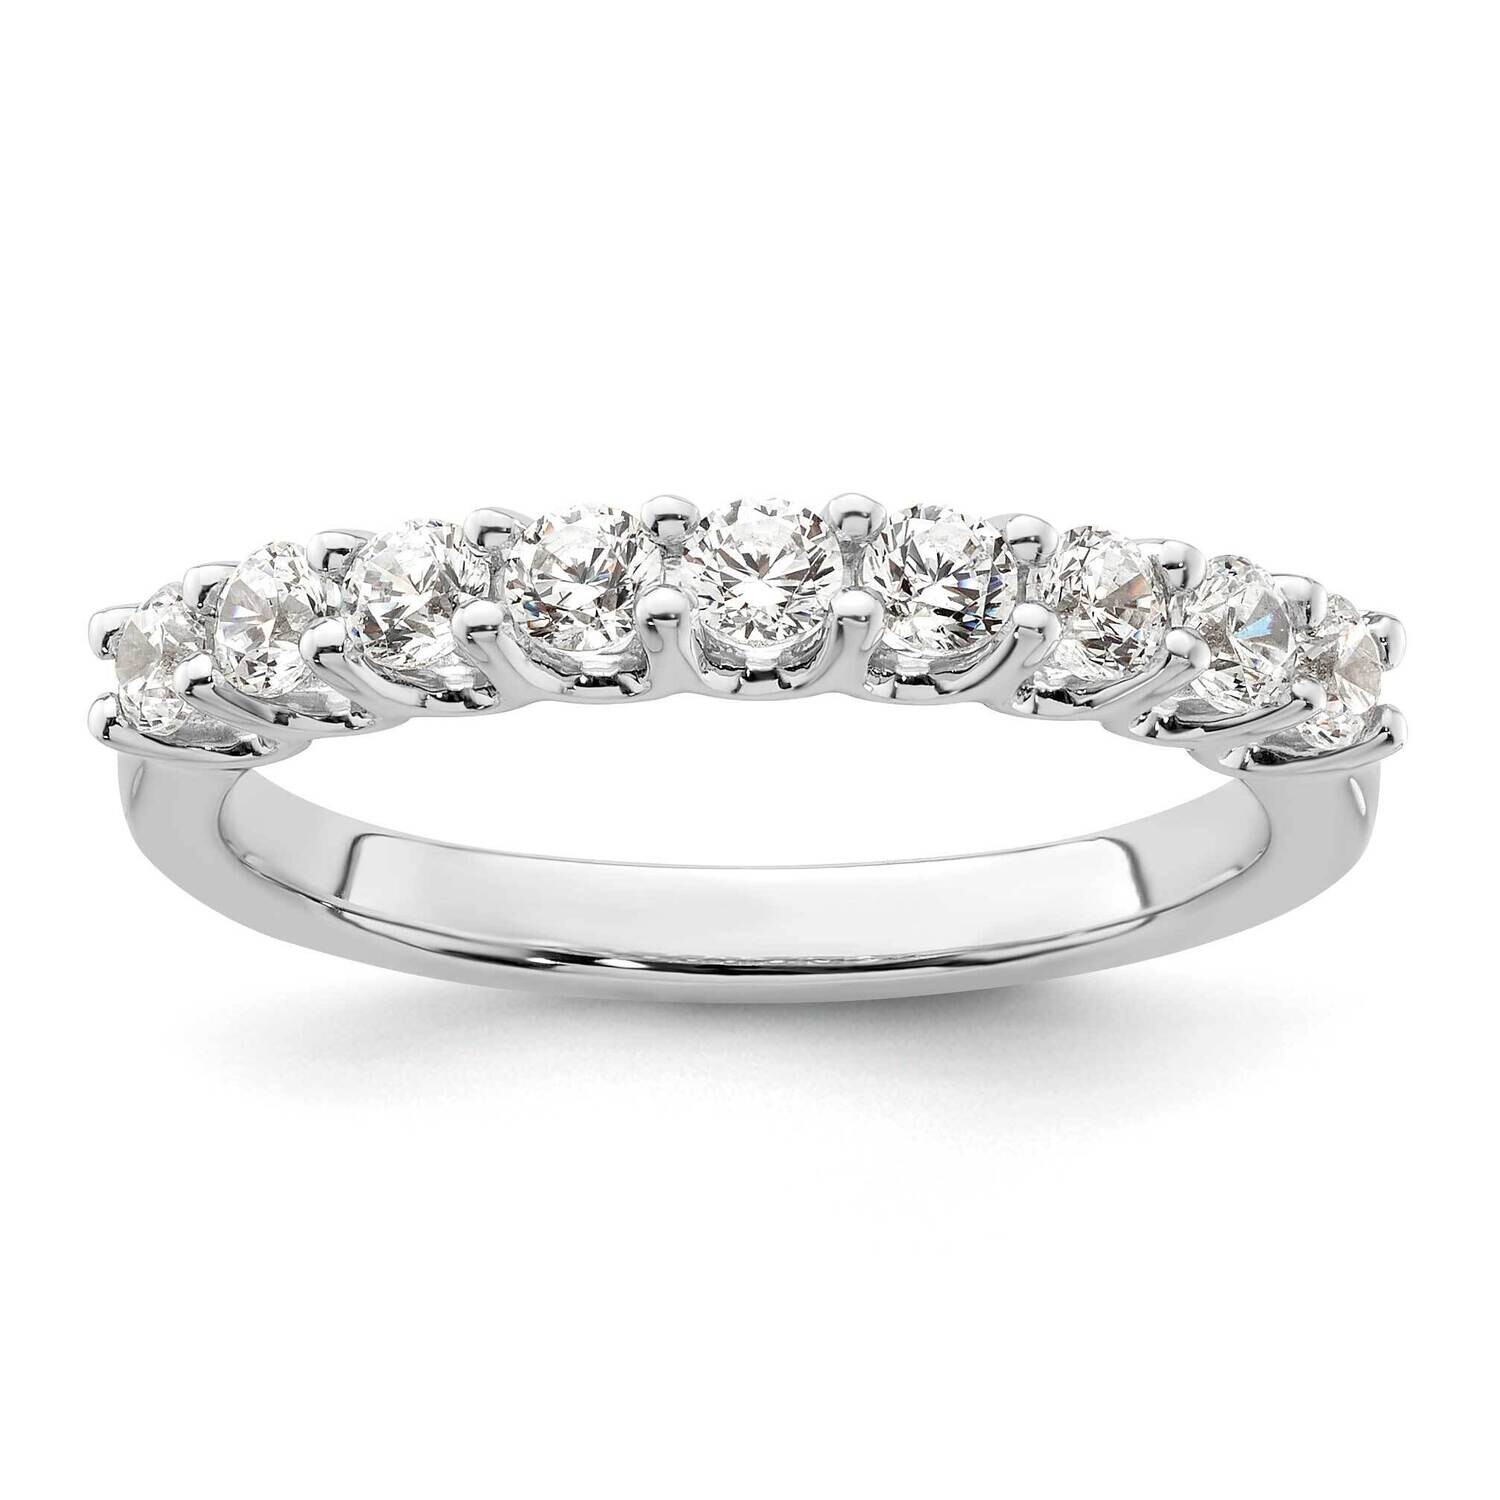 9-Stone Shared Prong Holds 9-2.6mm Round Diamond Band Ring Mounting 14k White Gold RM3190B-063-WAA